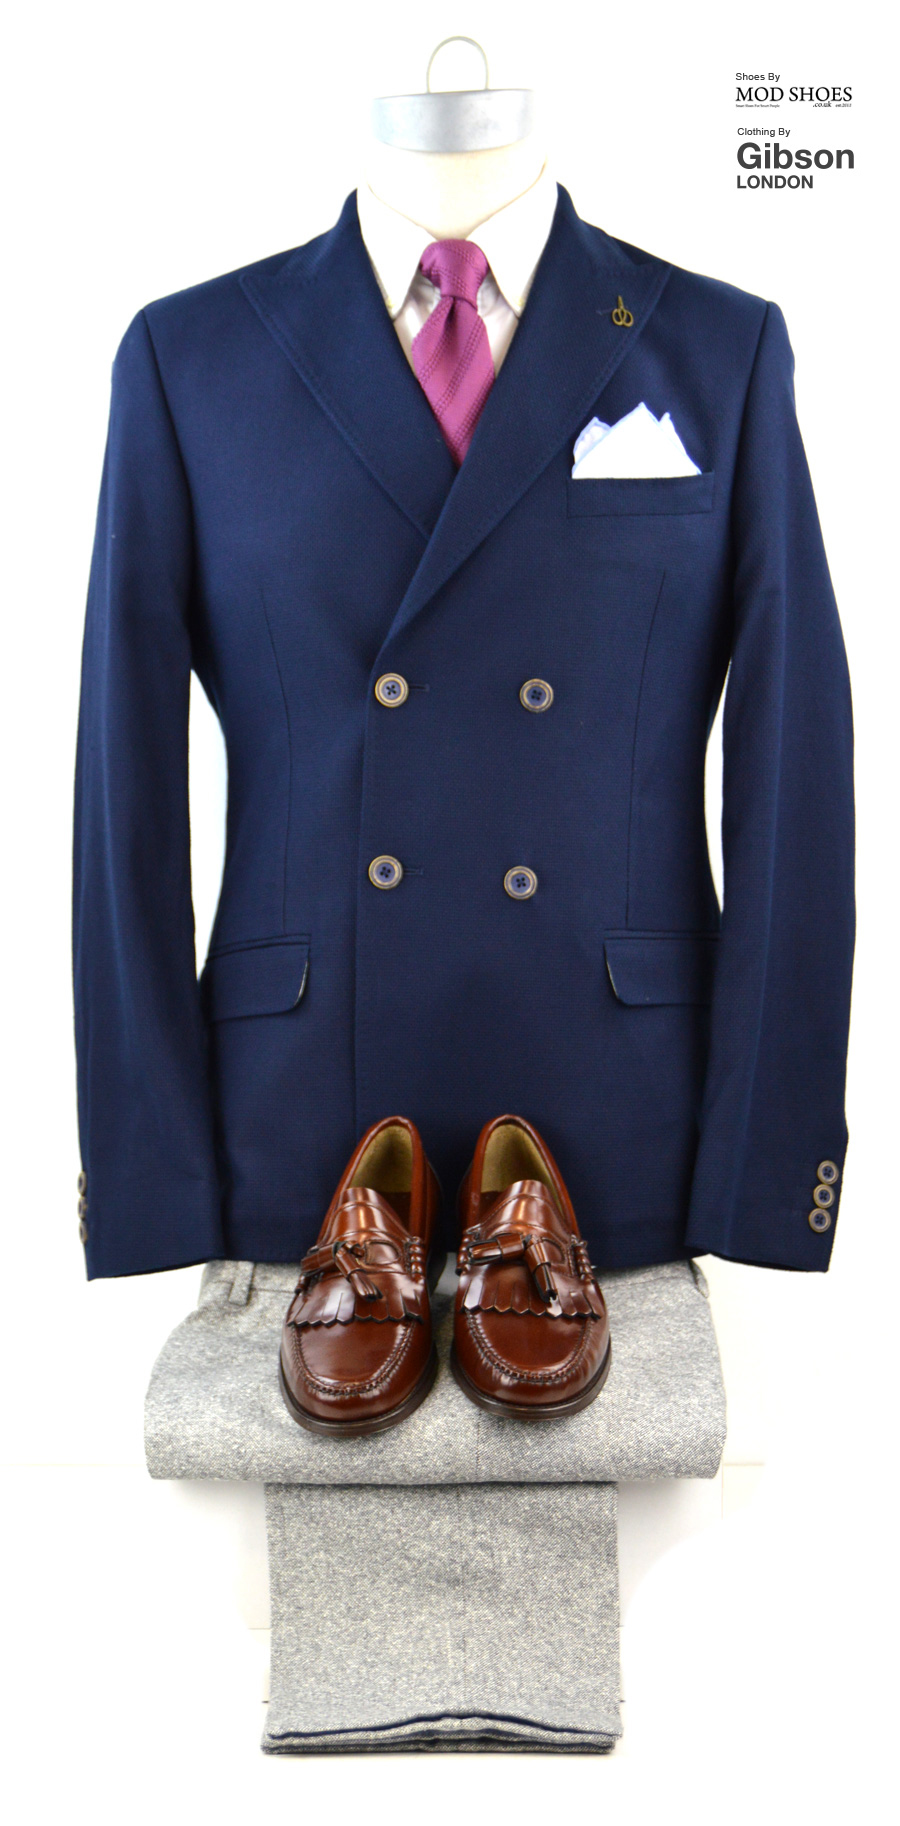 modshoes-chestnuyt-tassel-loafers-with-blue-jacket-form-gibson-clothing